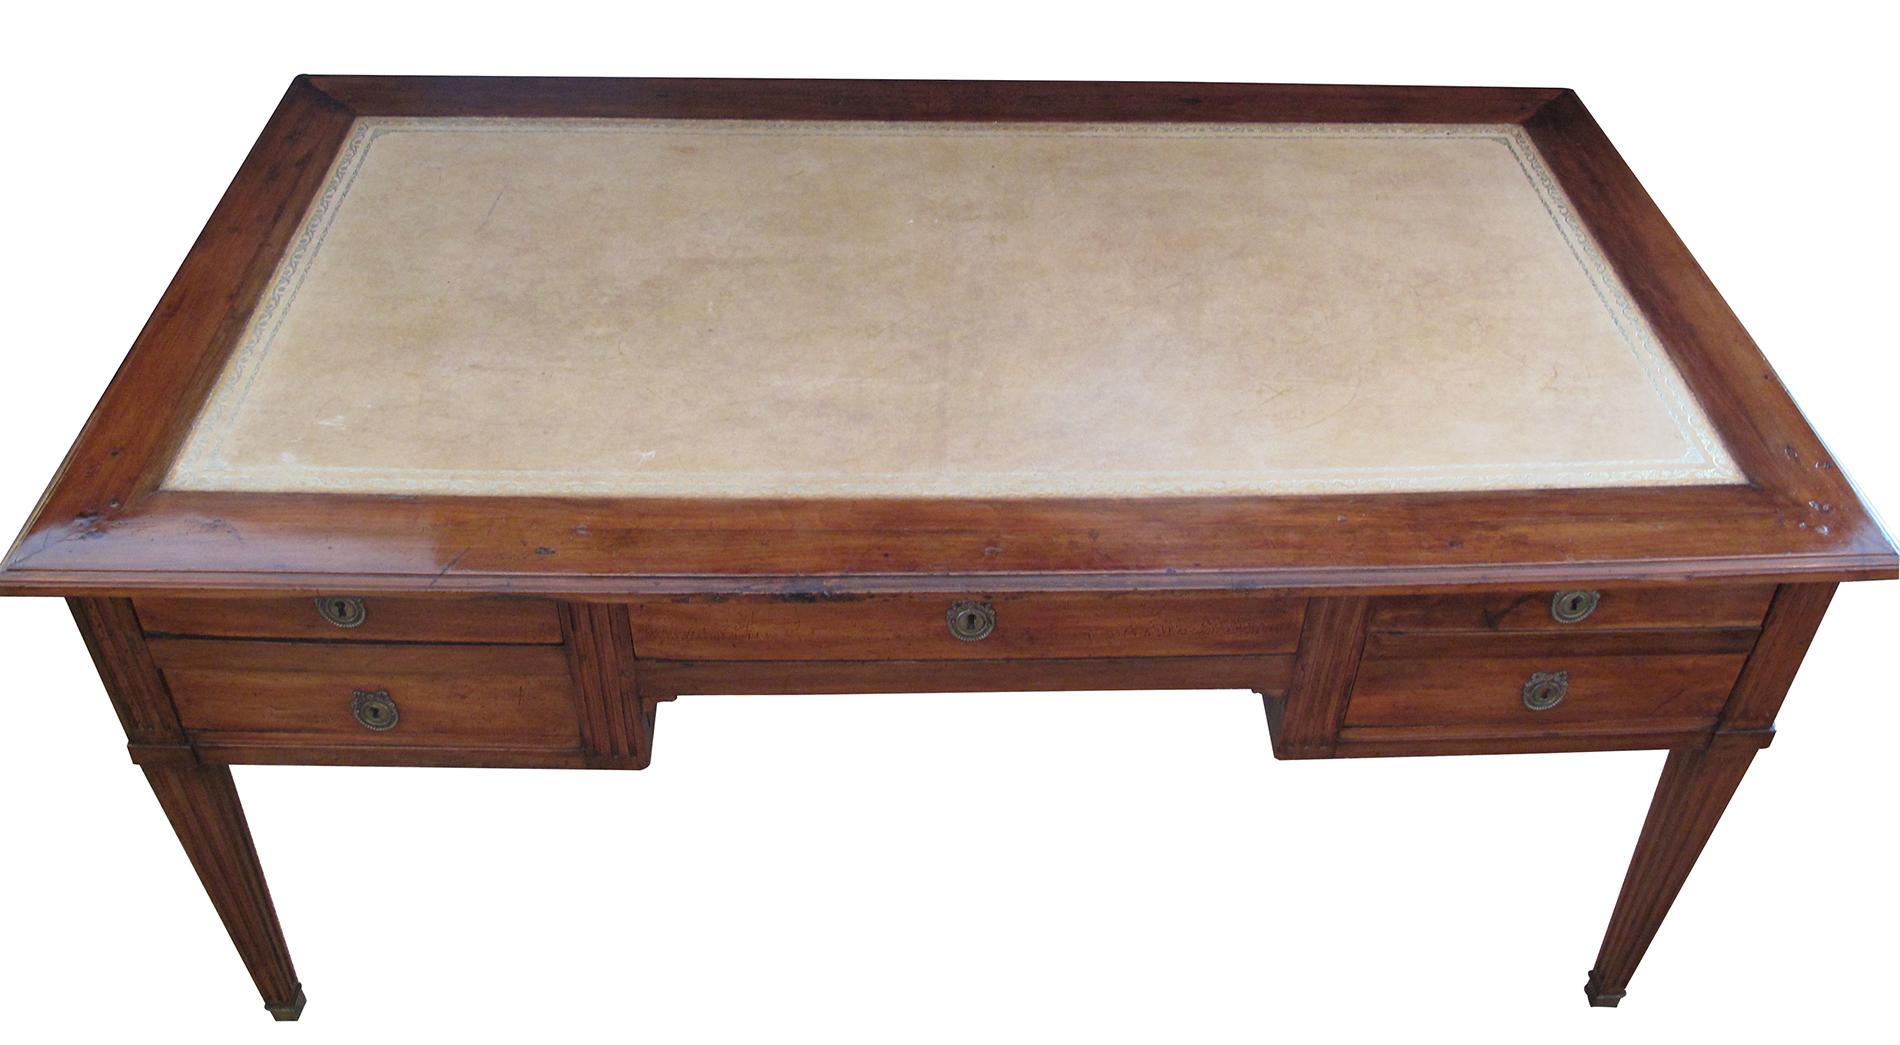 Late 18th Century Handsome Italian Neoclassical Walnut 5-Drawer Writing Desk with Leather Top